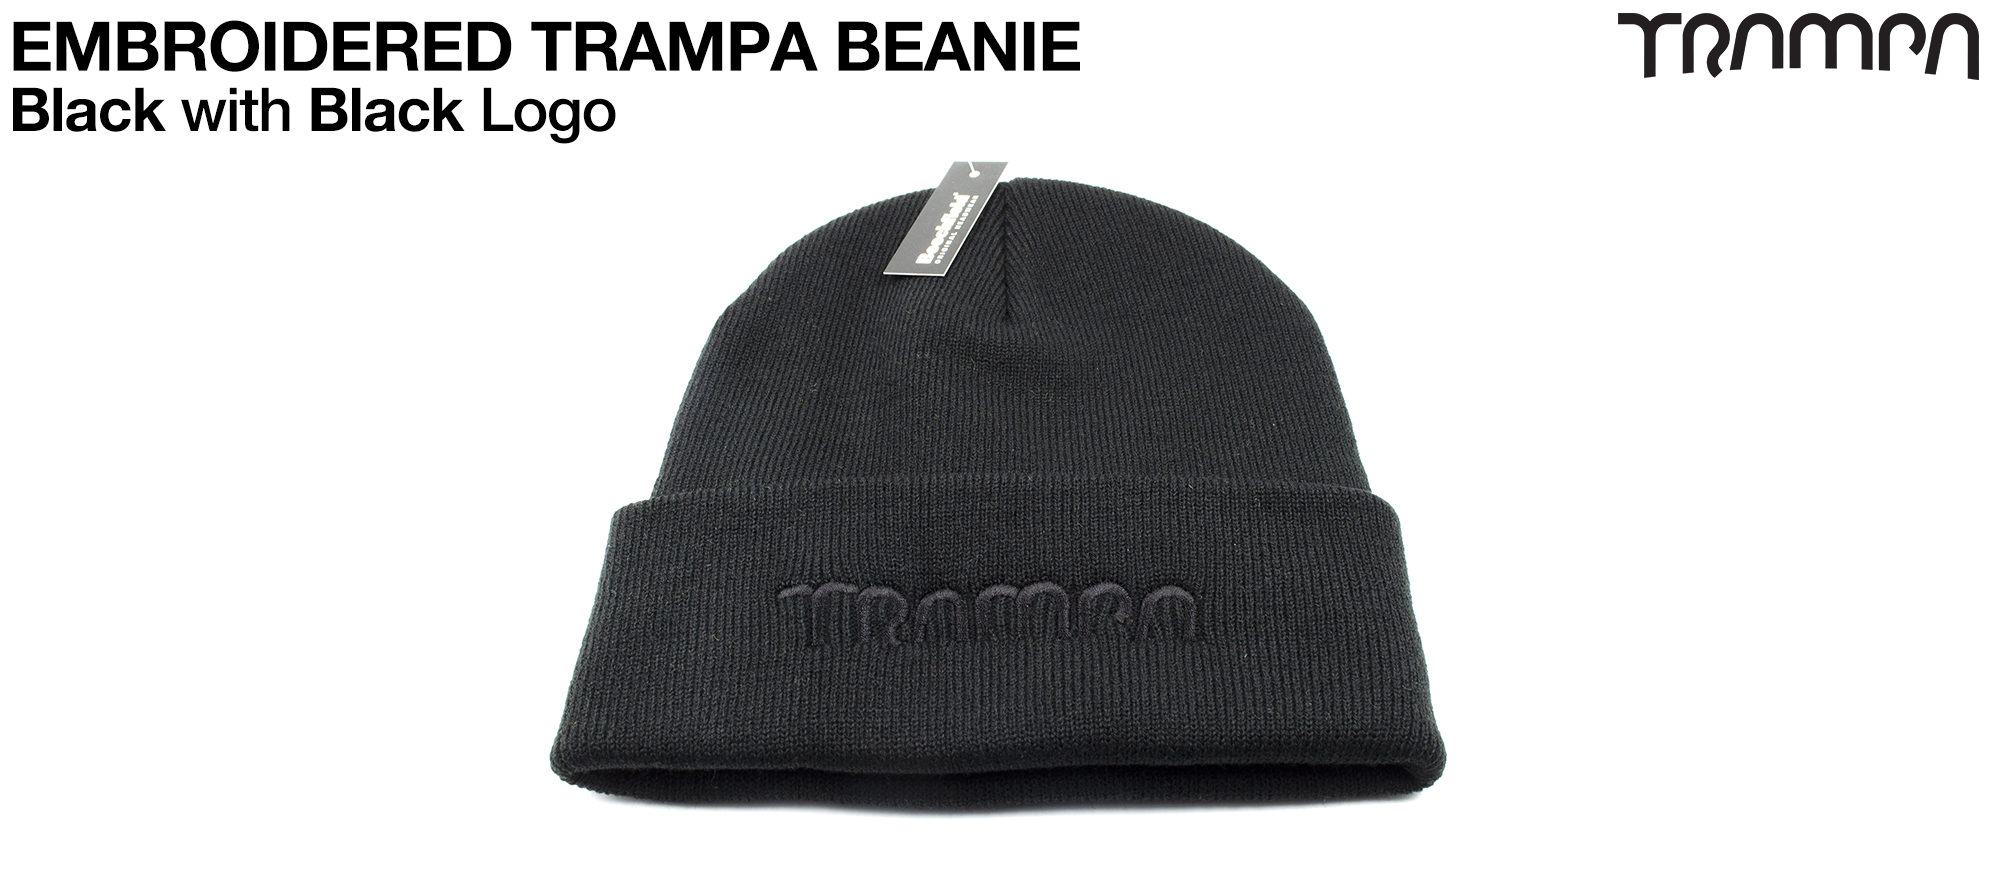 BLACK Beanie with BLACK TRAMPA logo - Double thick turn over for extra warmth